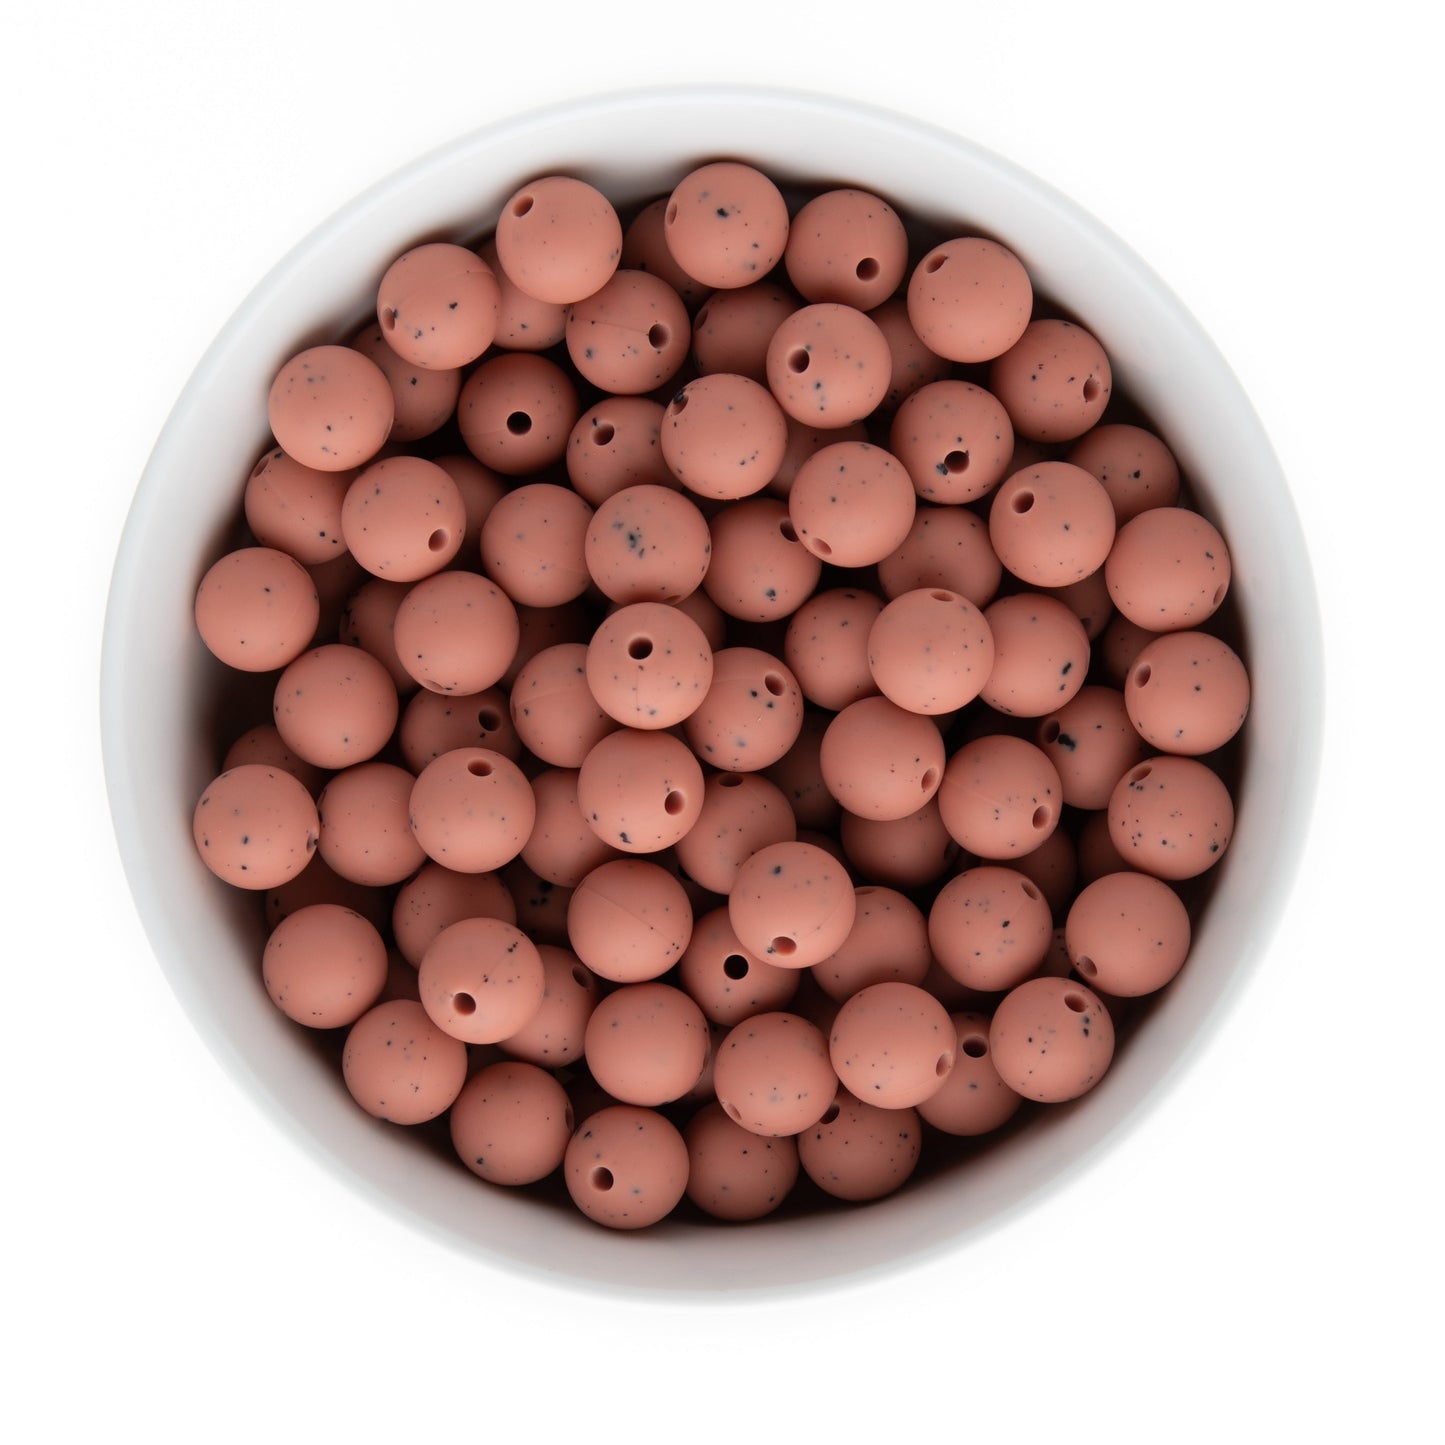 12mm Round Silicone Beads